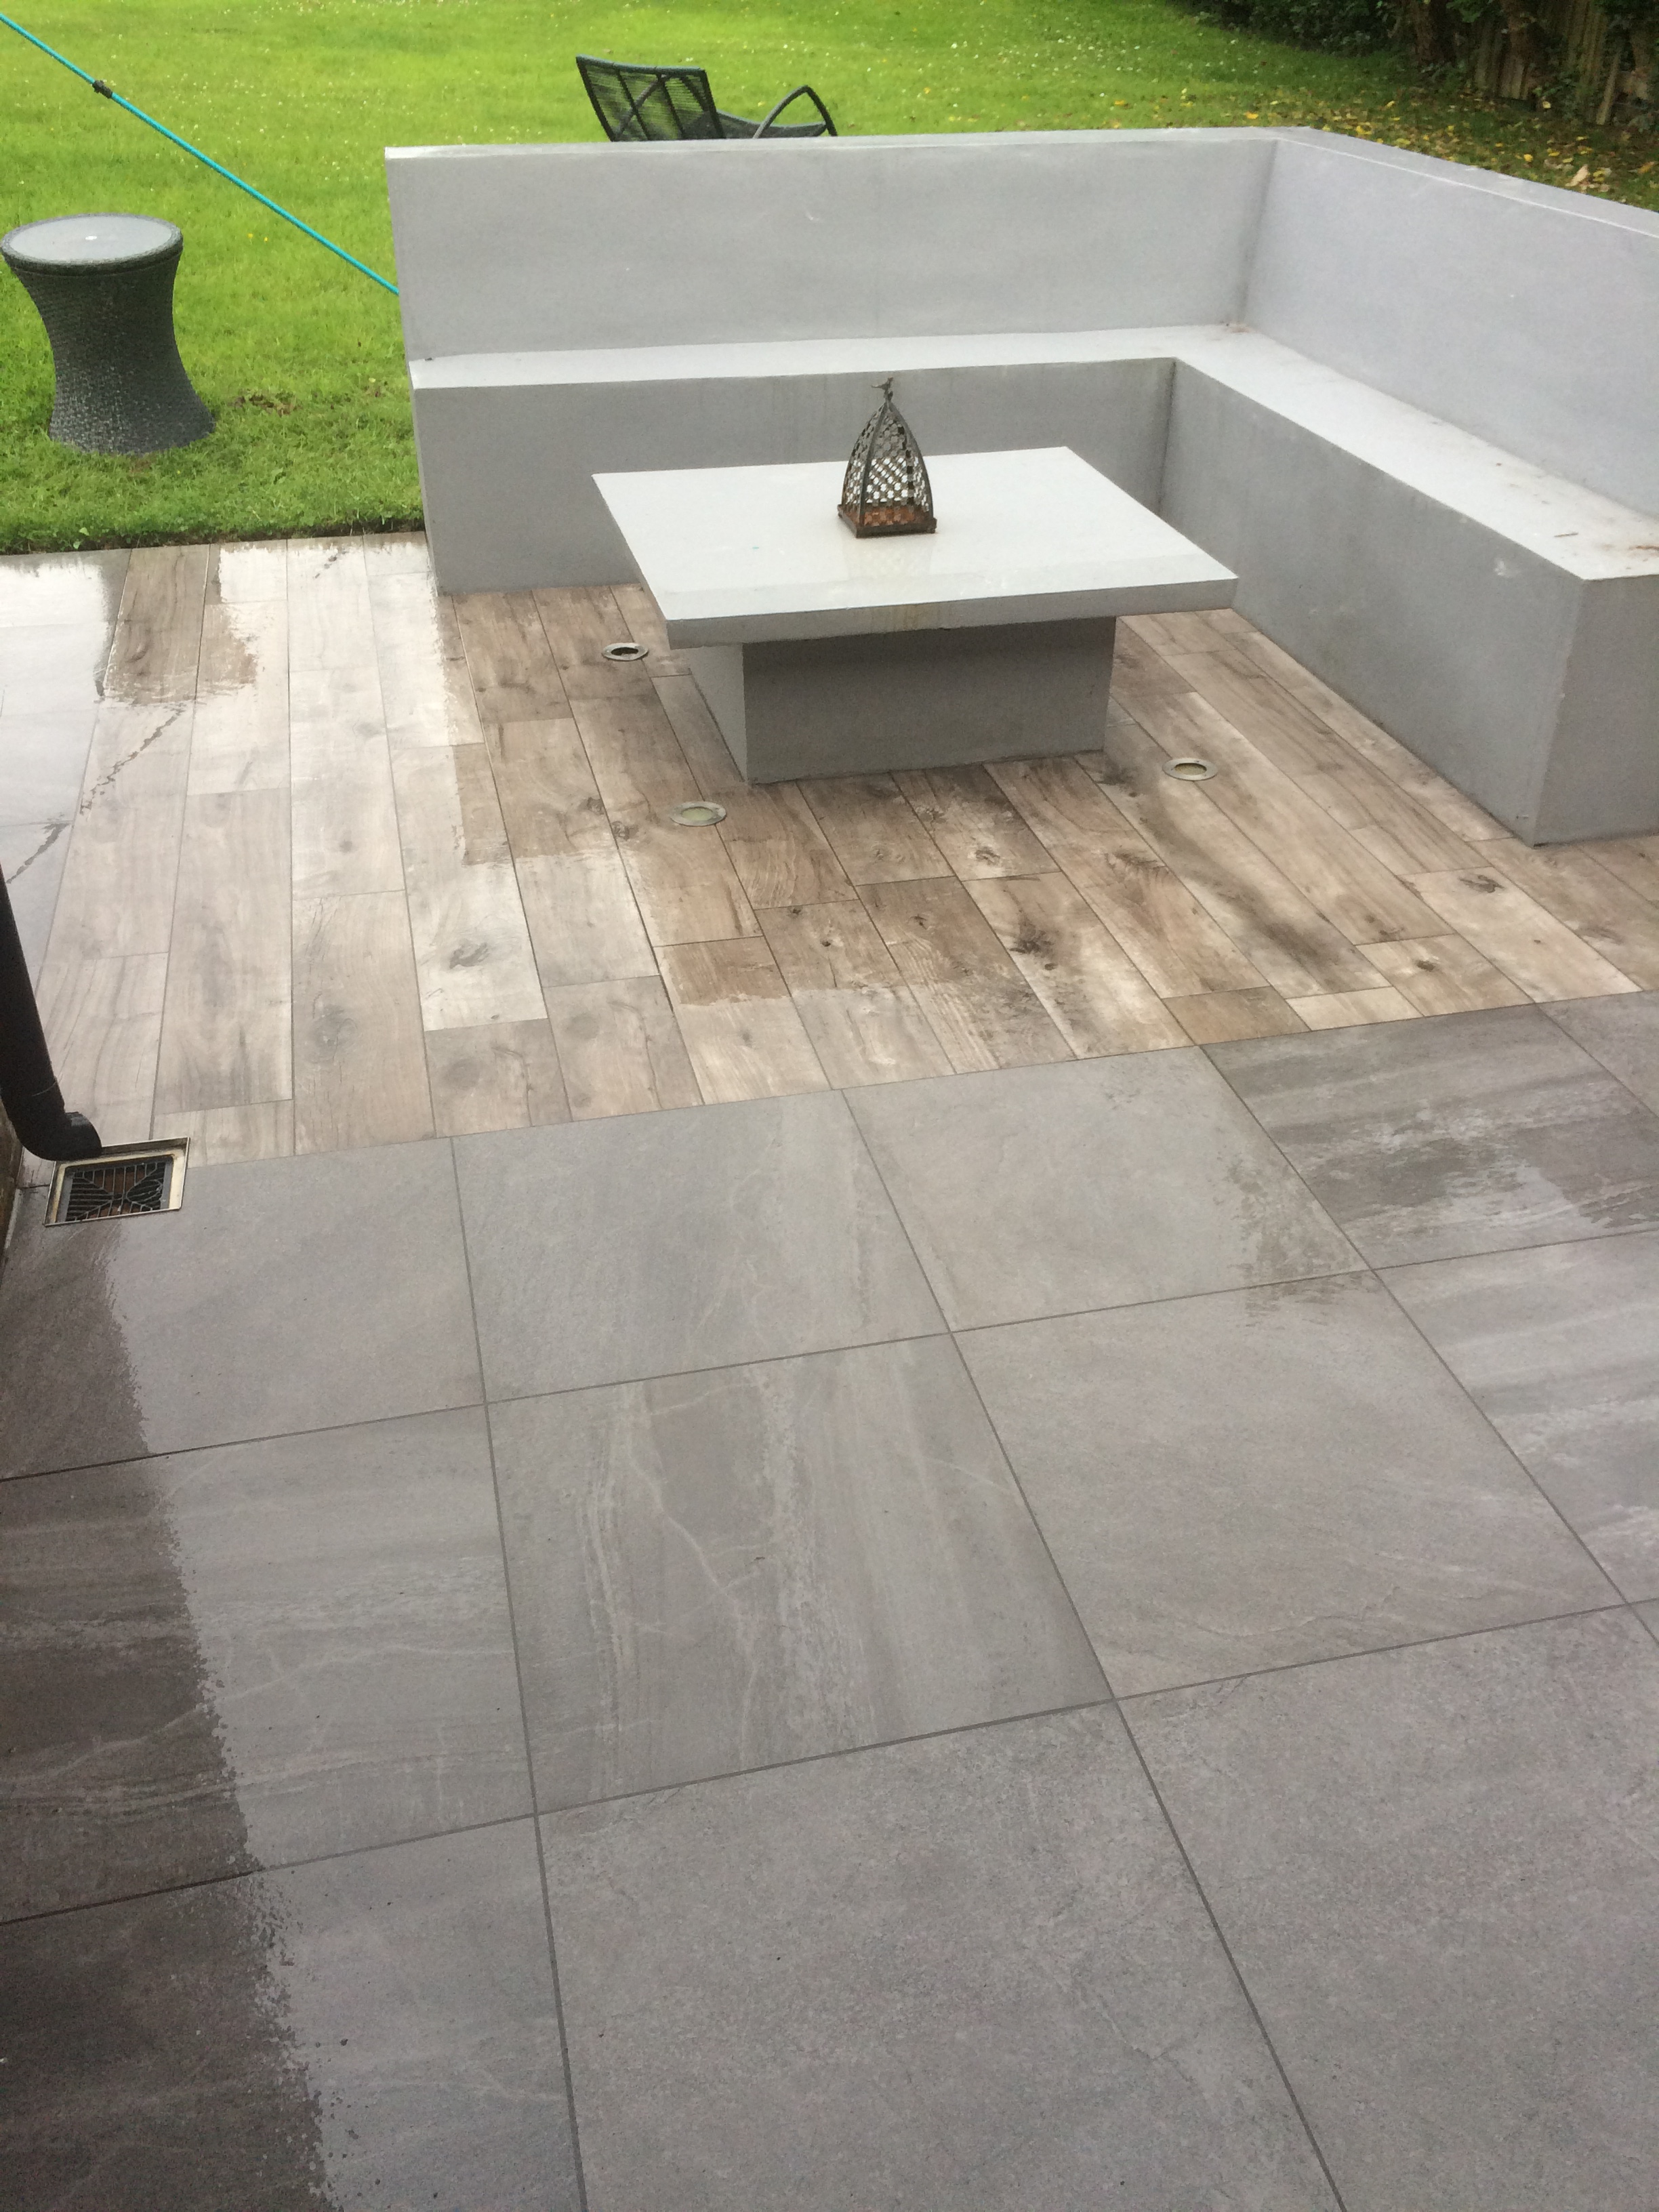 Using Wood Effect Tiles Outside, Wood Style Tiles Outdoor